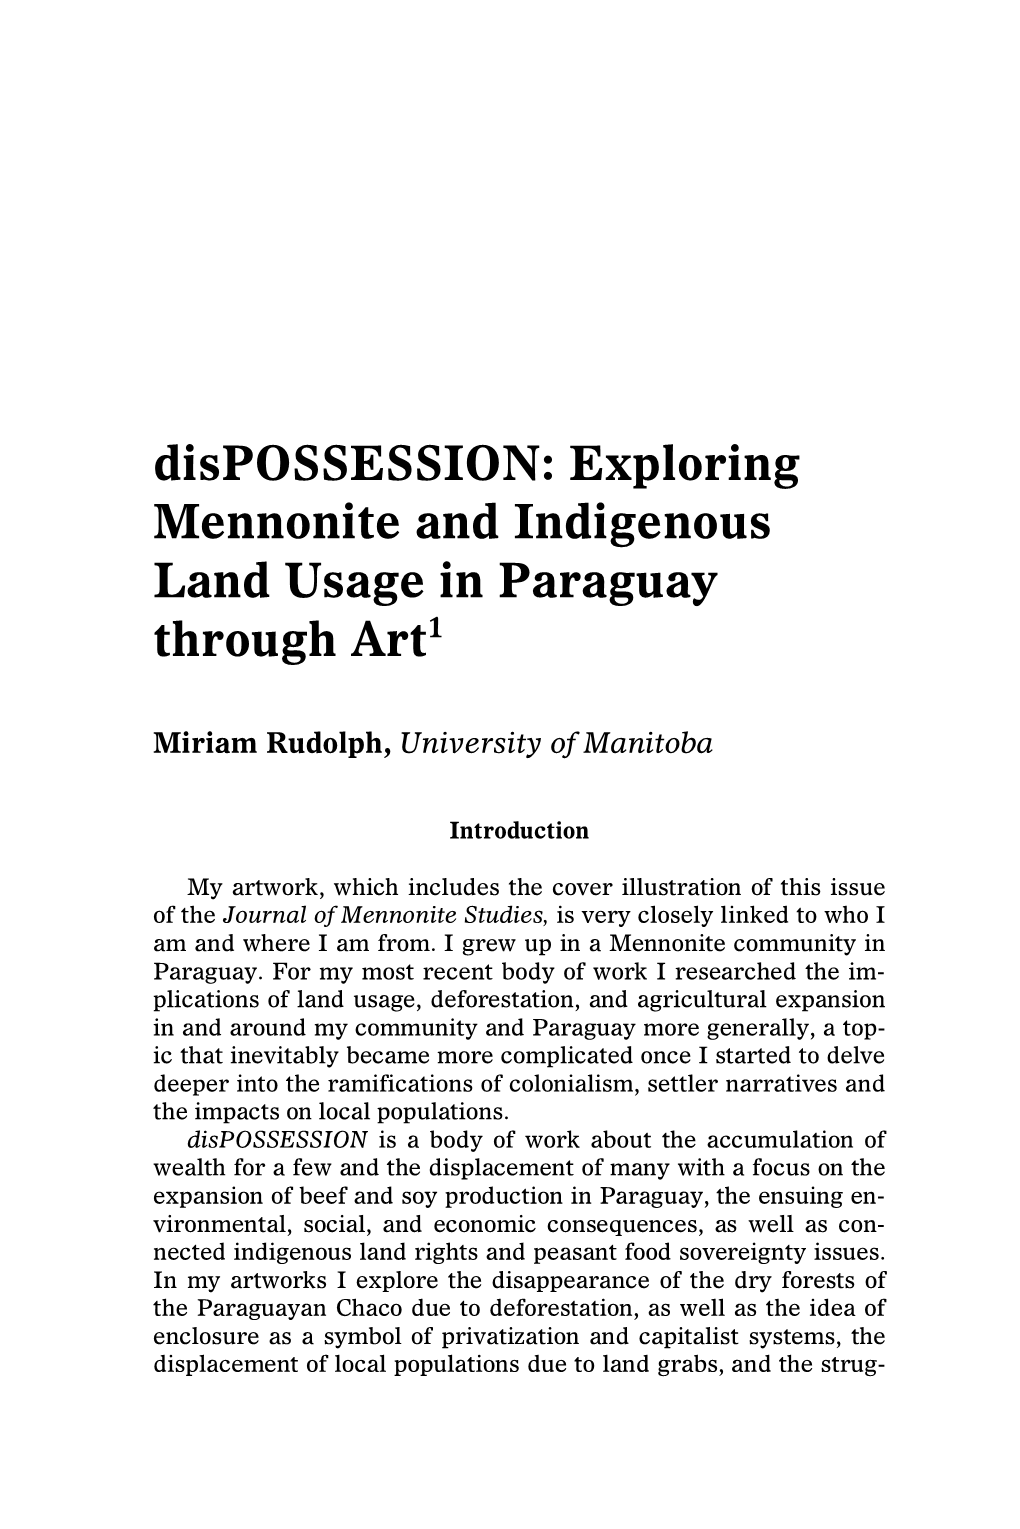 Dispossession: Exploring Mennonite and Indigenous Land Usage in Paraguay Through Art1